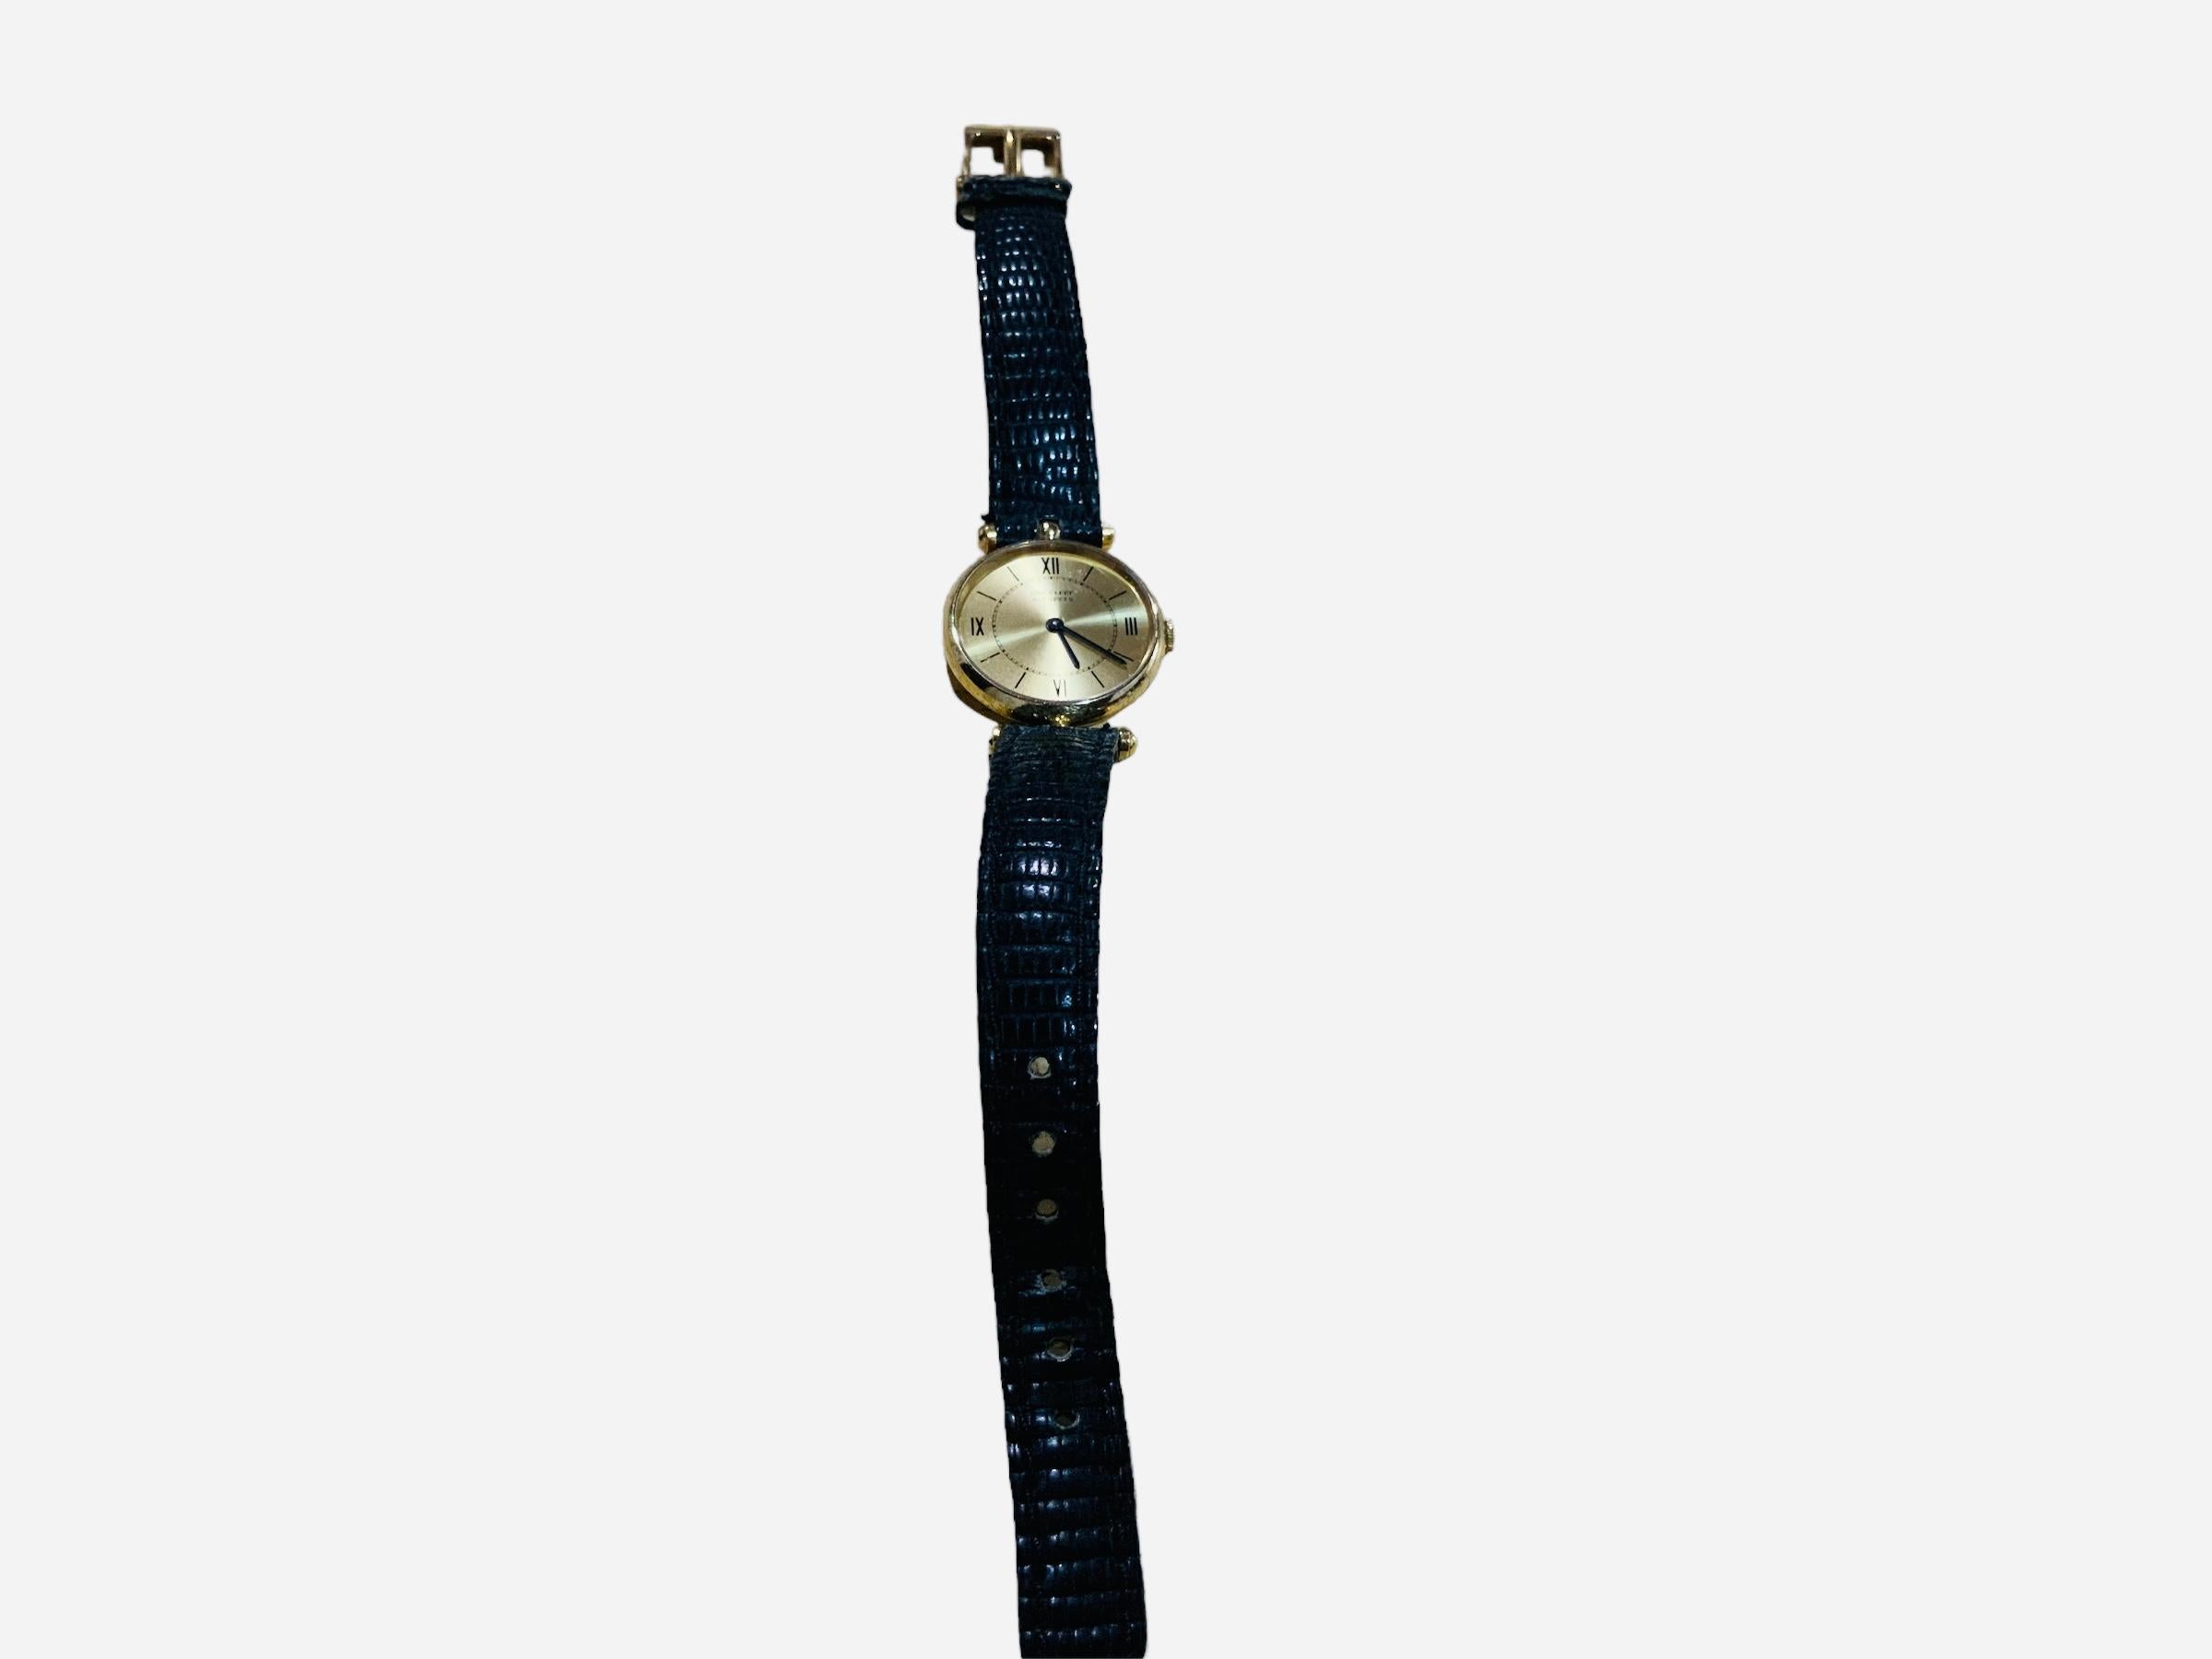 Van Cleef & Arpels Pierre Arpels Lady’s Wrist Watch  In Good Condition For Sale In Guaynabo, PR